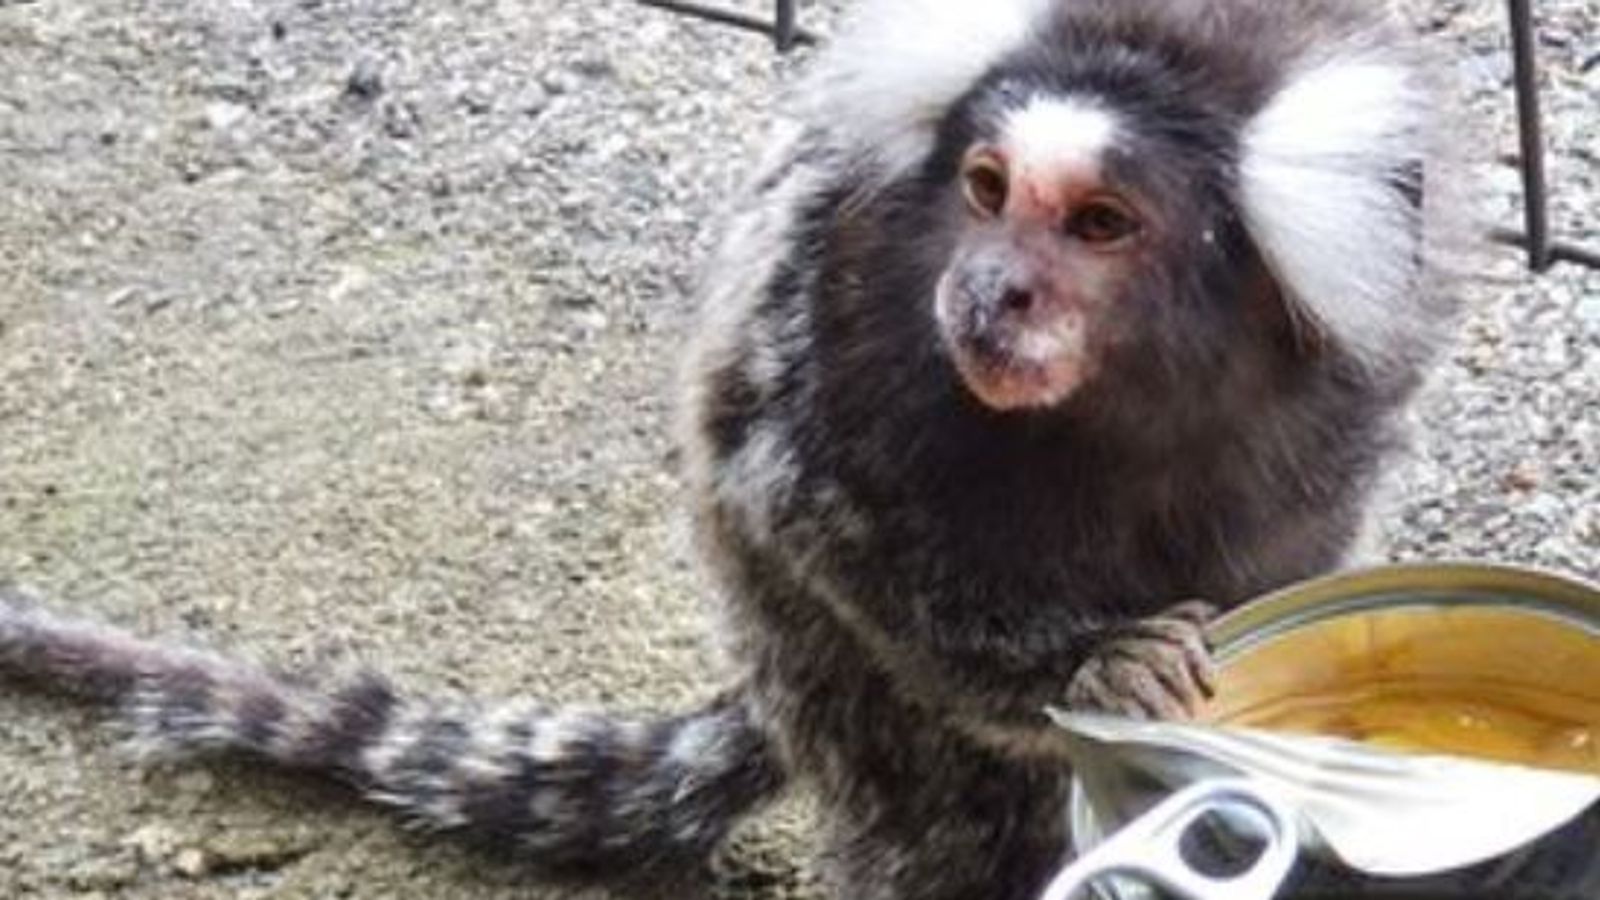 Runaway monkey reunited with family after train station adventure